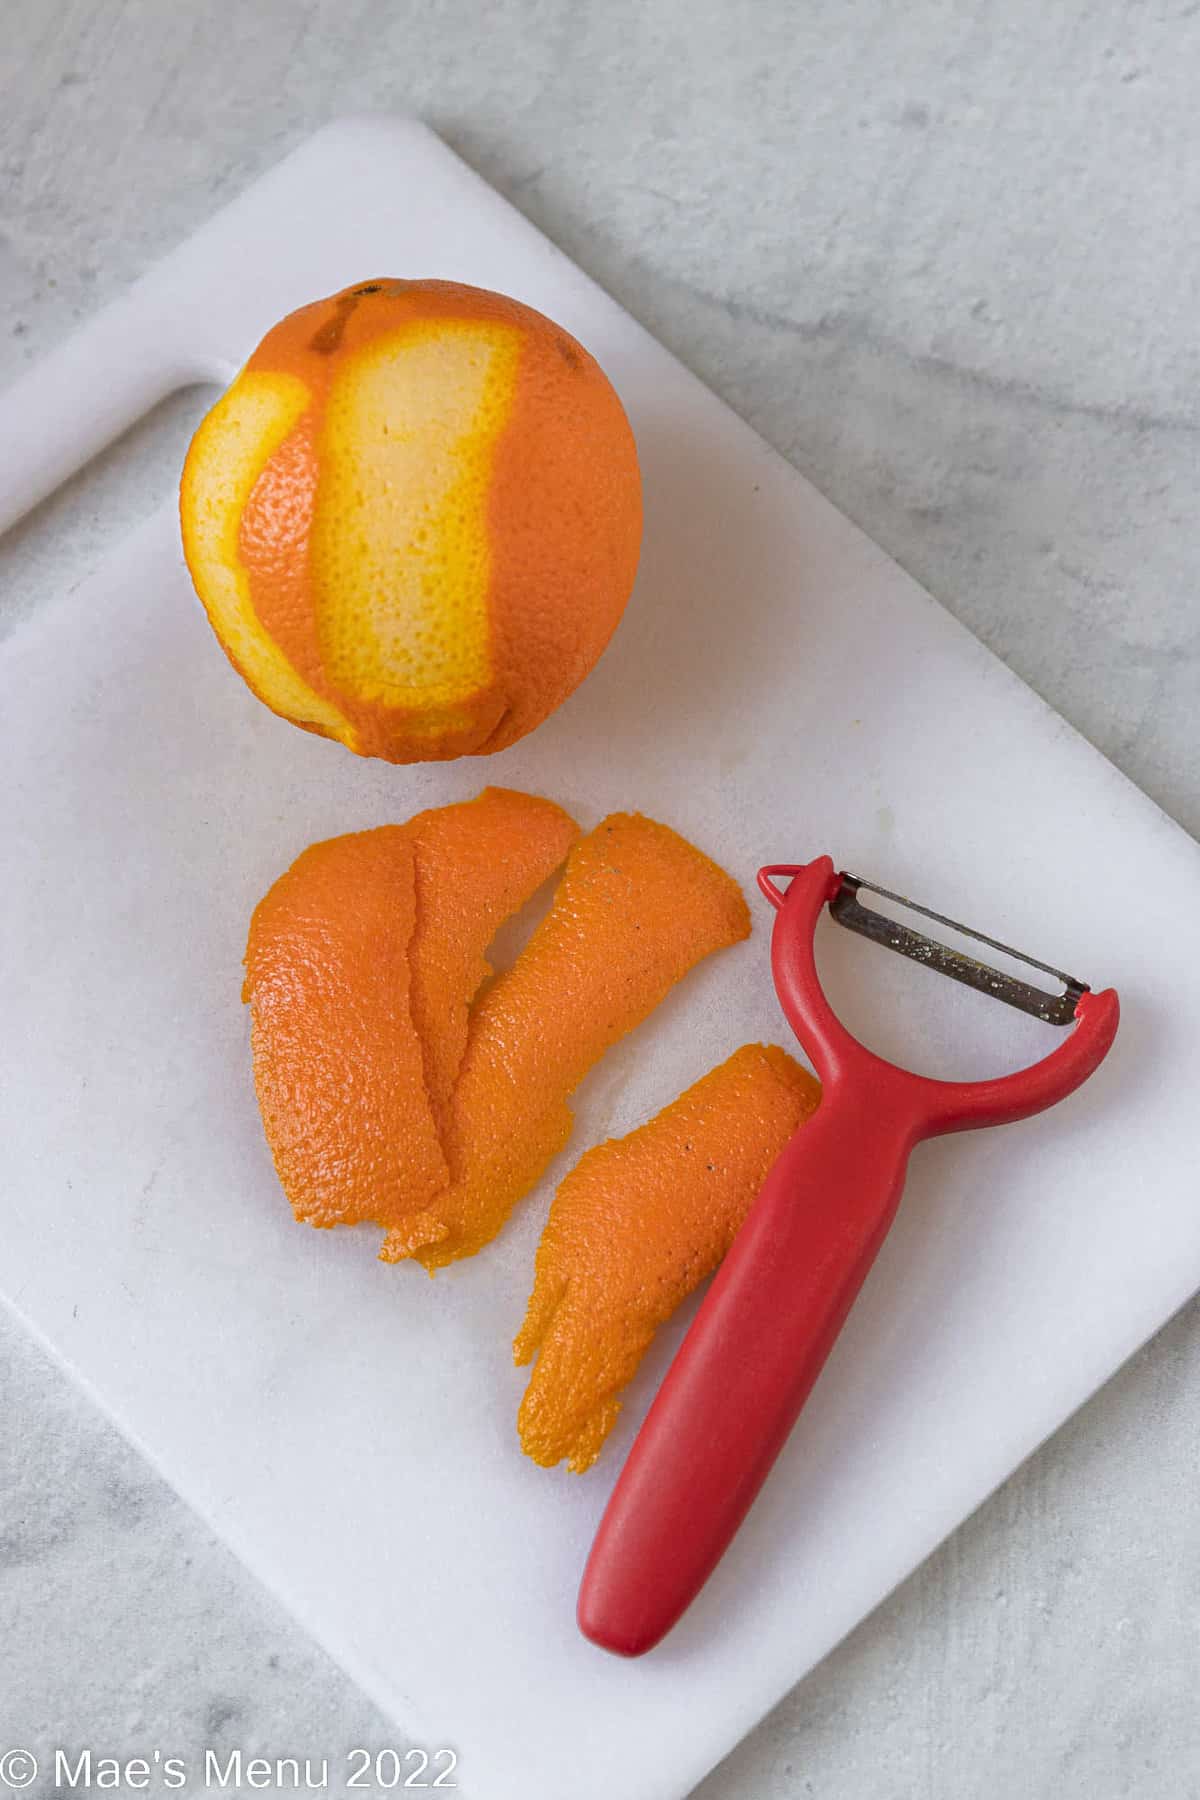 An orange with 4 pieces of zest peeled off of it.